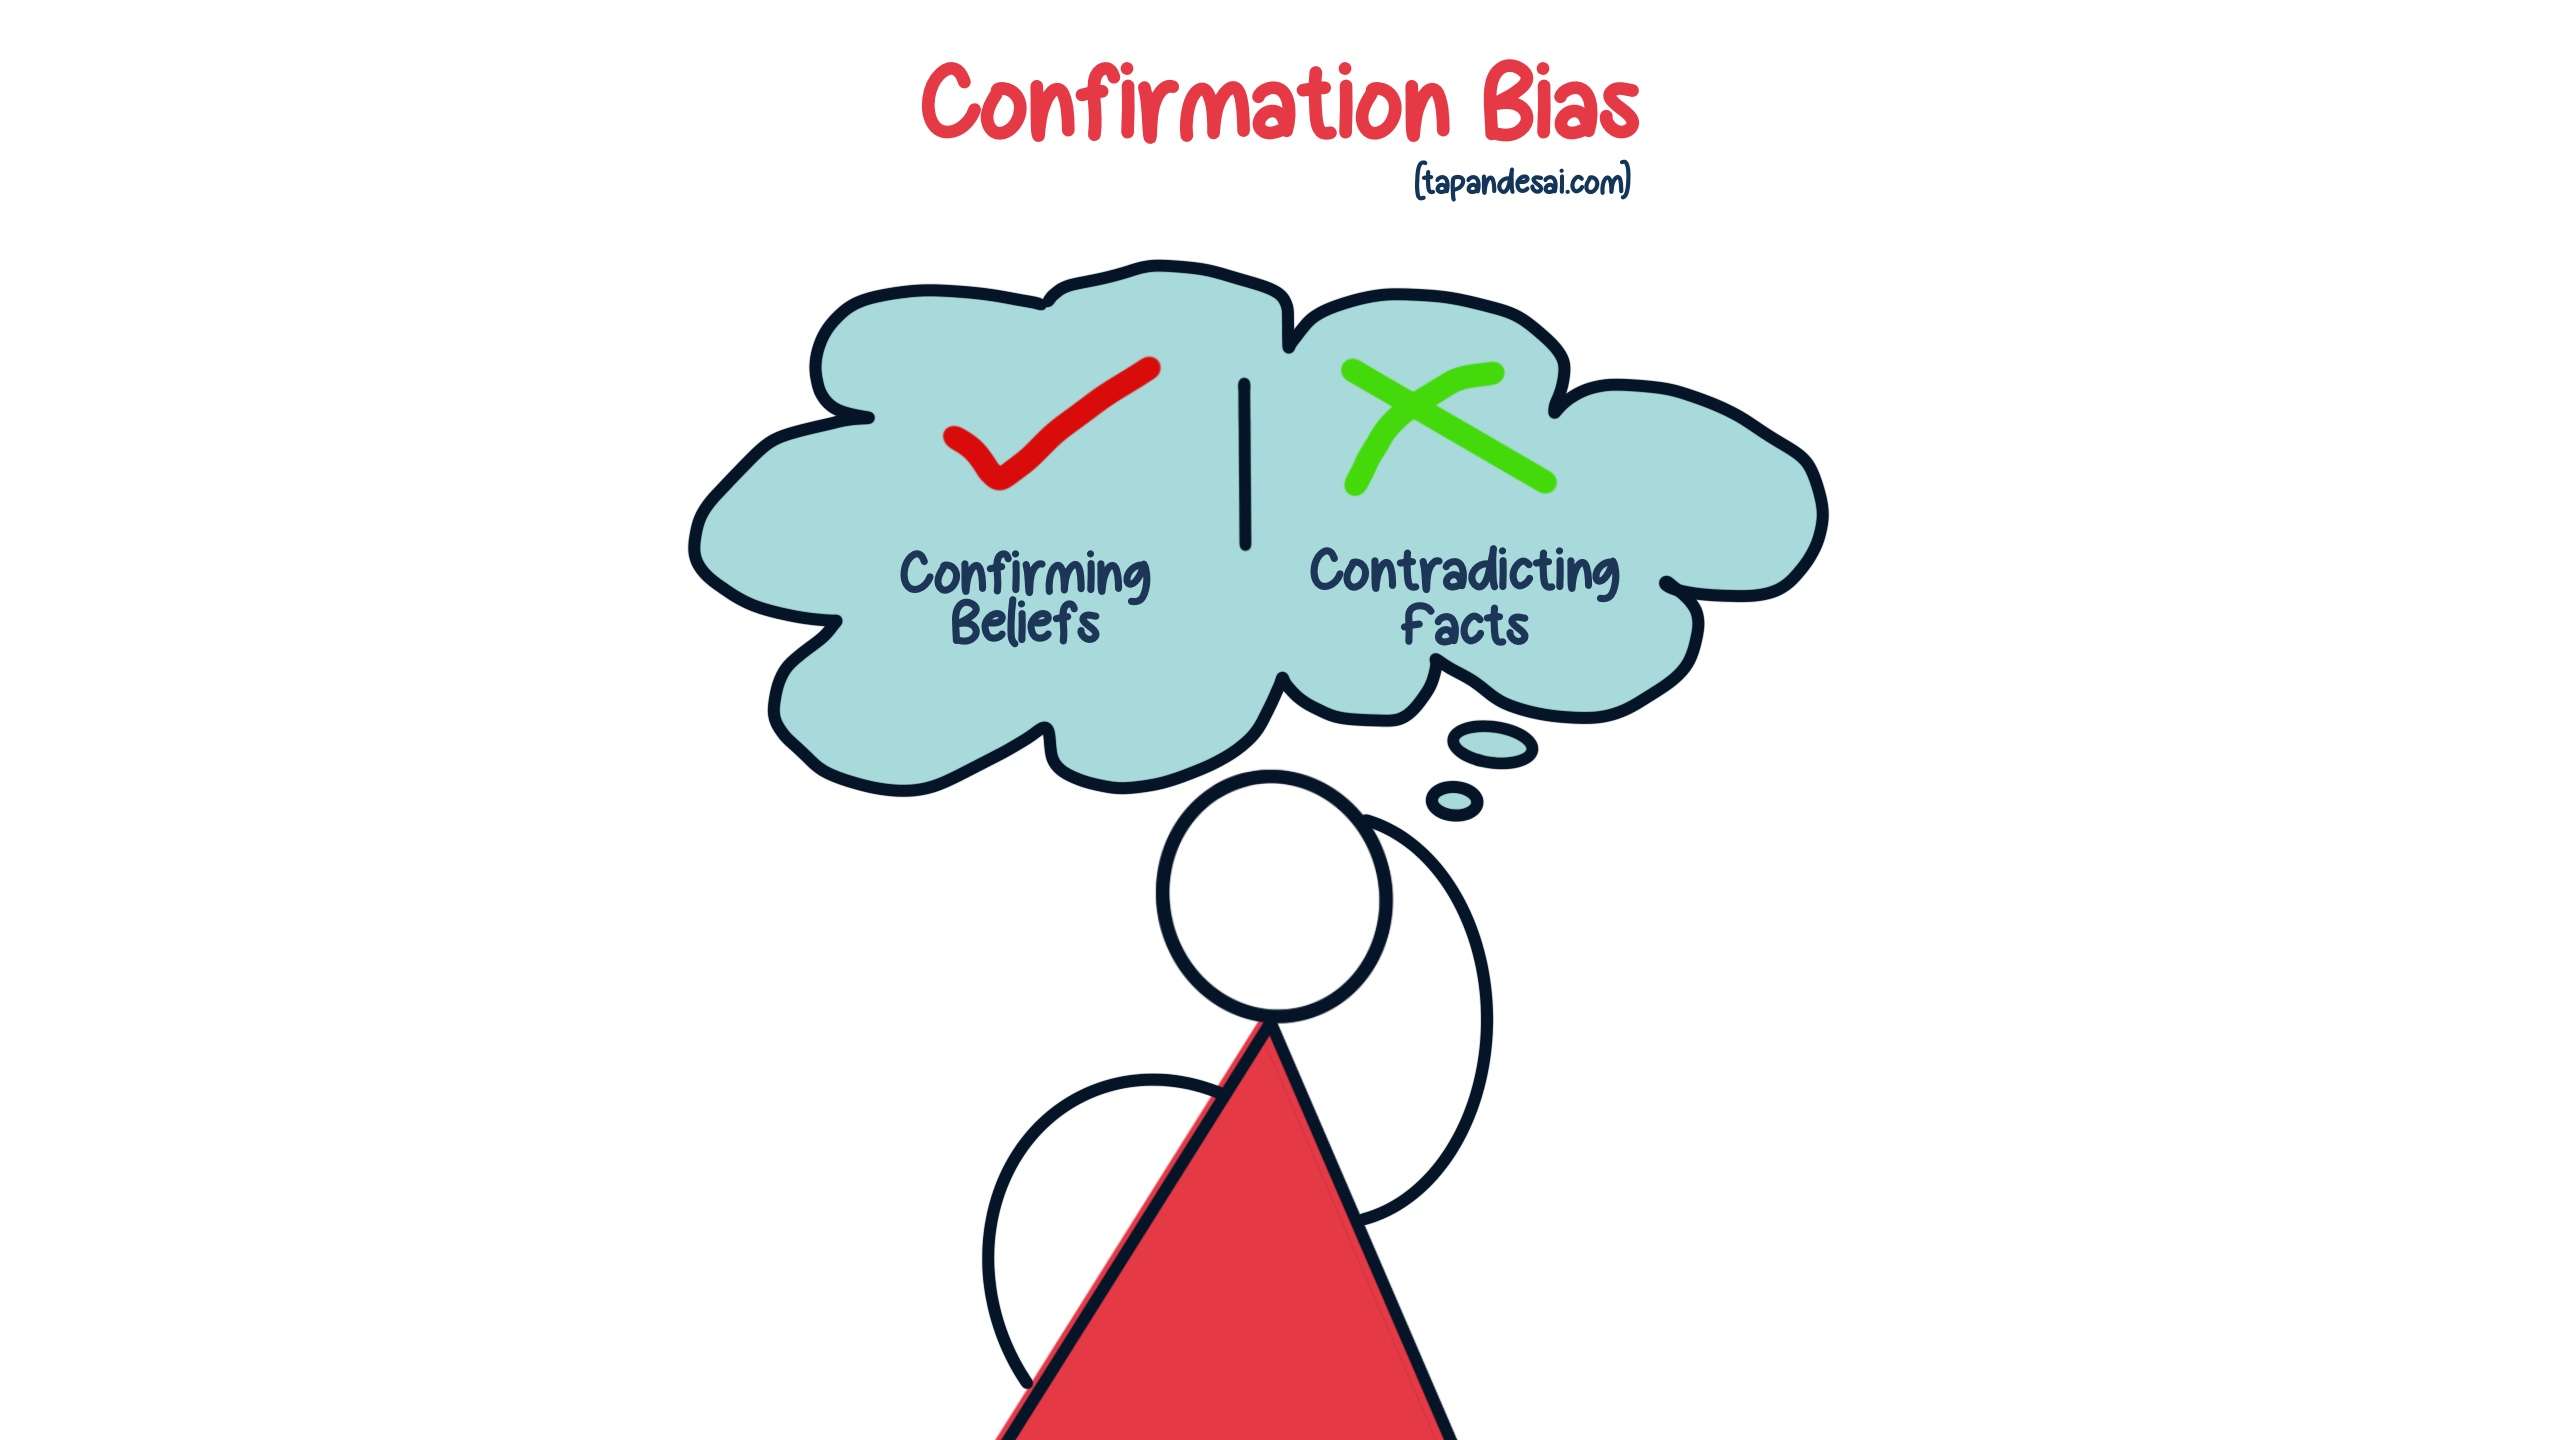 Thought bubble depicting the selective focus on confirming beliefs and dismissal of contradicting information due to Confirmation Bias